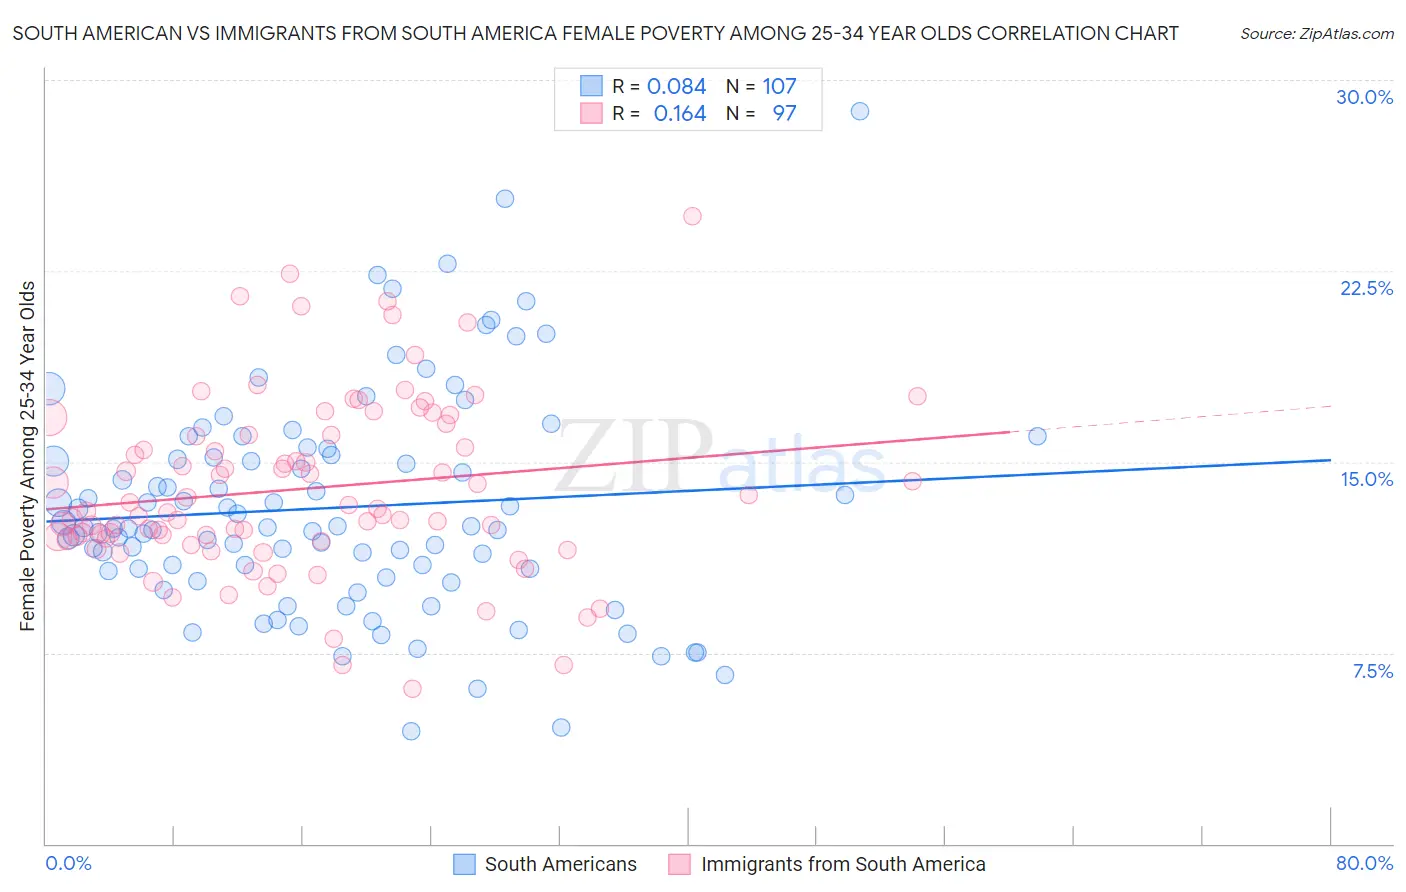 South American vs Immigrants from South America Female Poverty Among 25-34 Year Olds